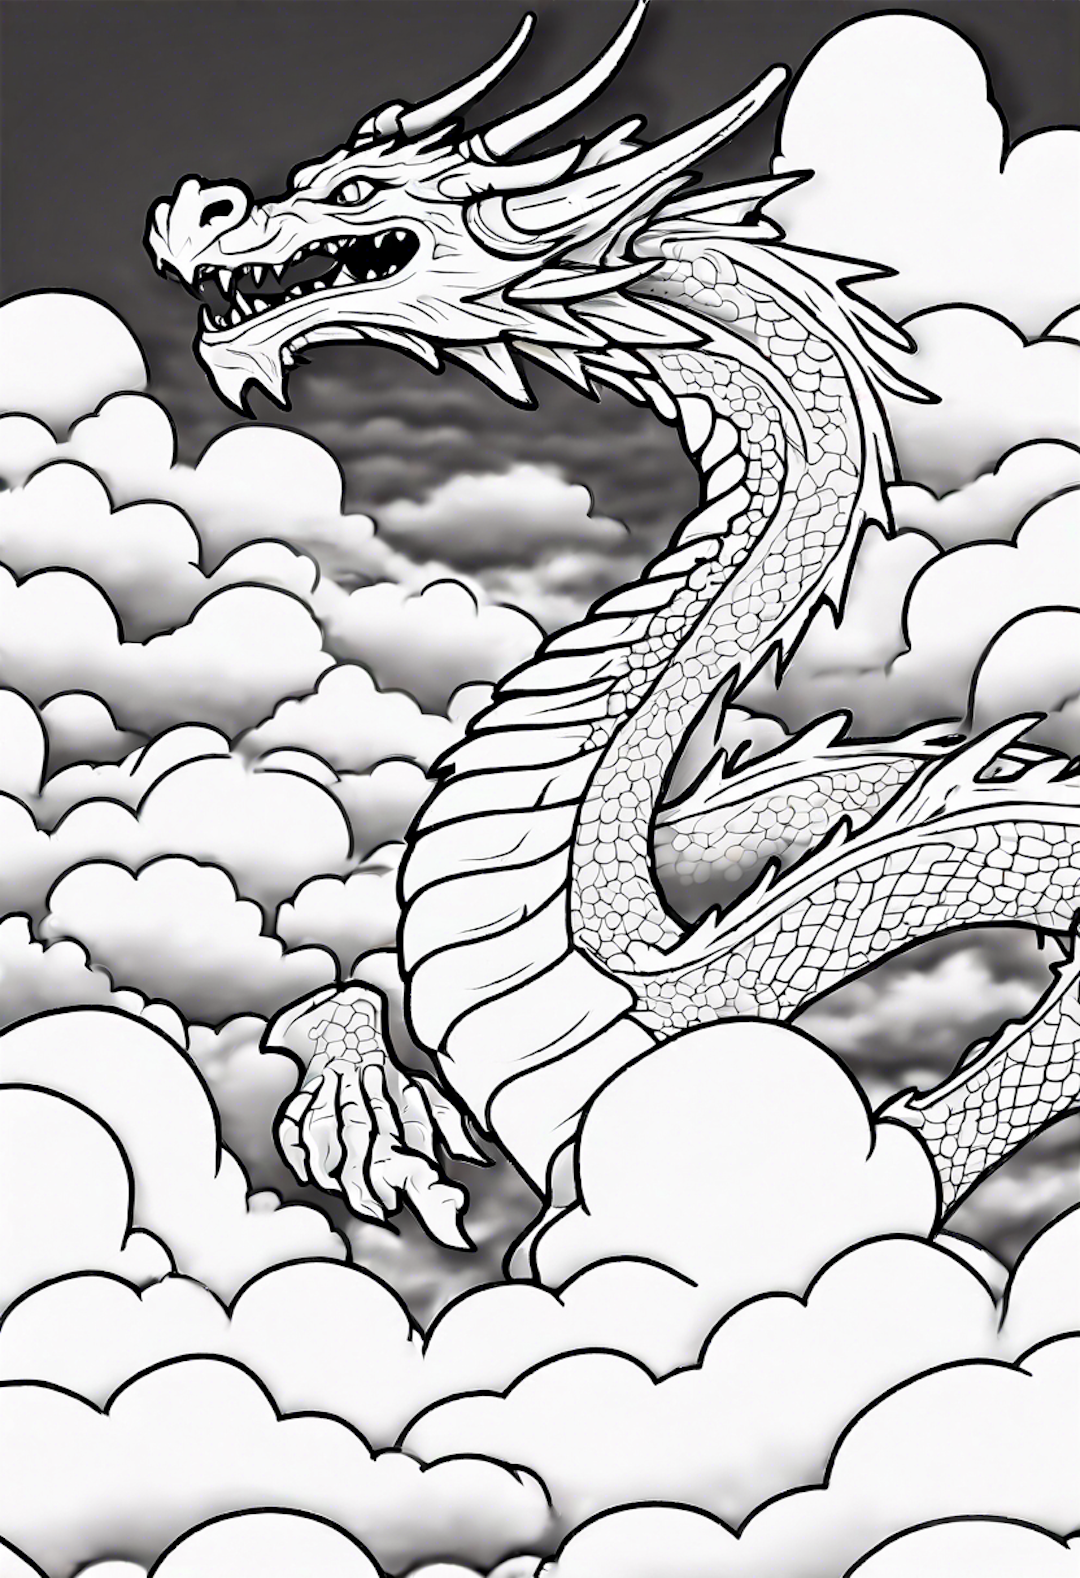 Dragon Soaring Above The Clouds